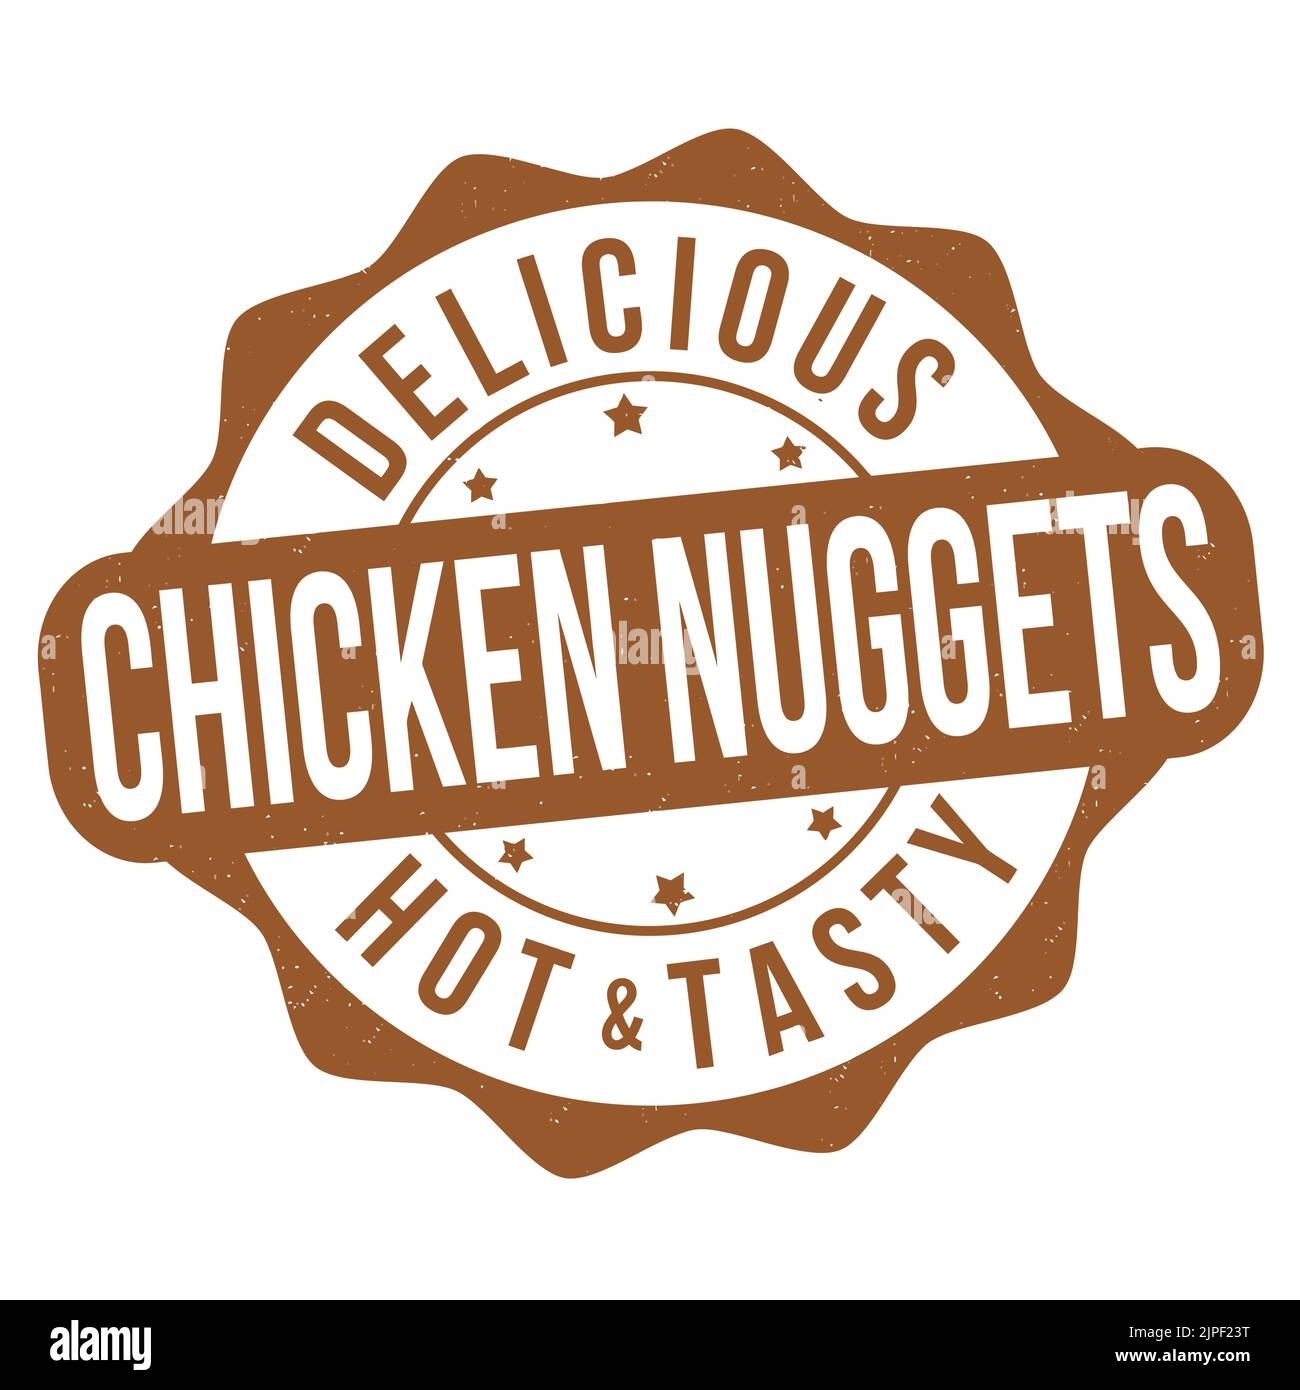 Chicken nuggets grunge rubber stamp on white background, vector illustration Stock Vector